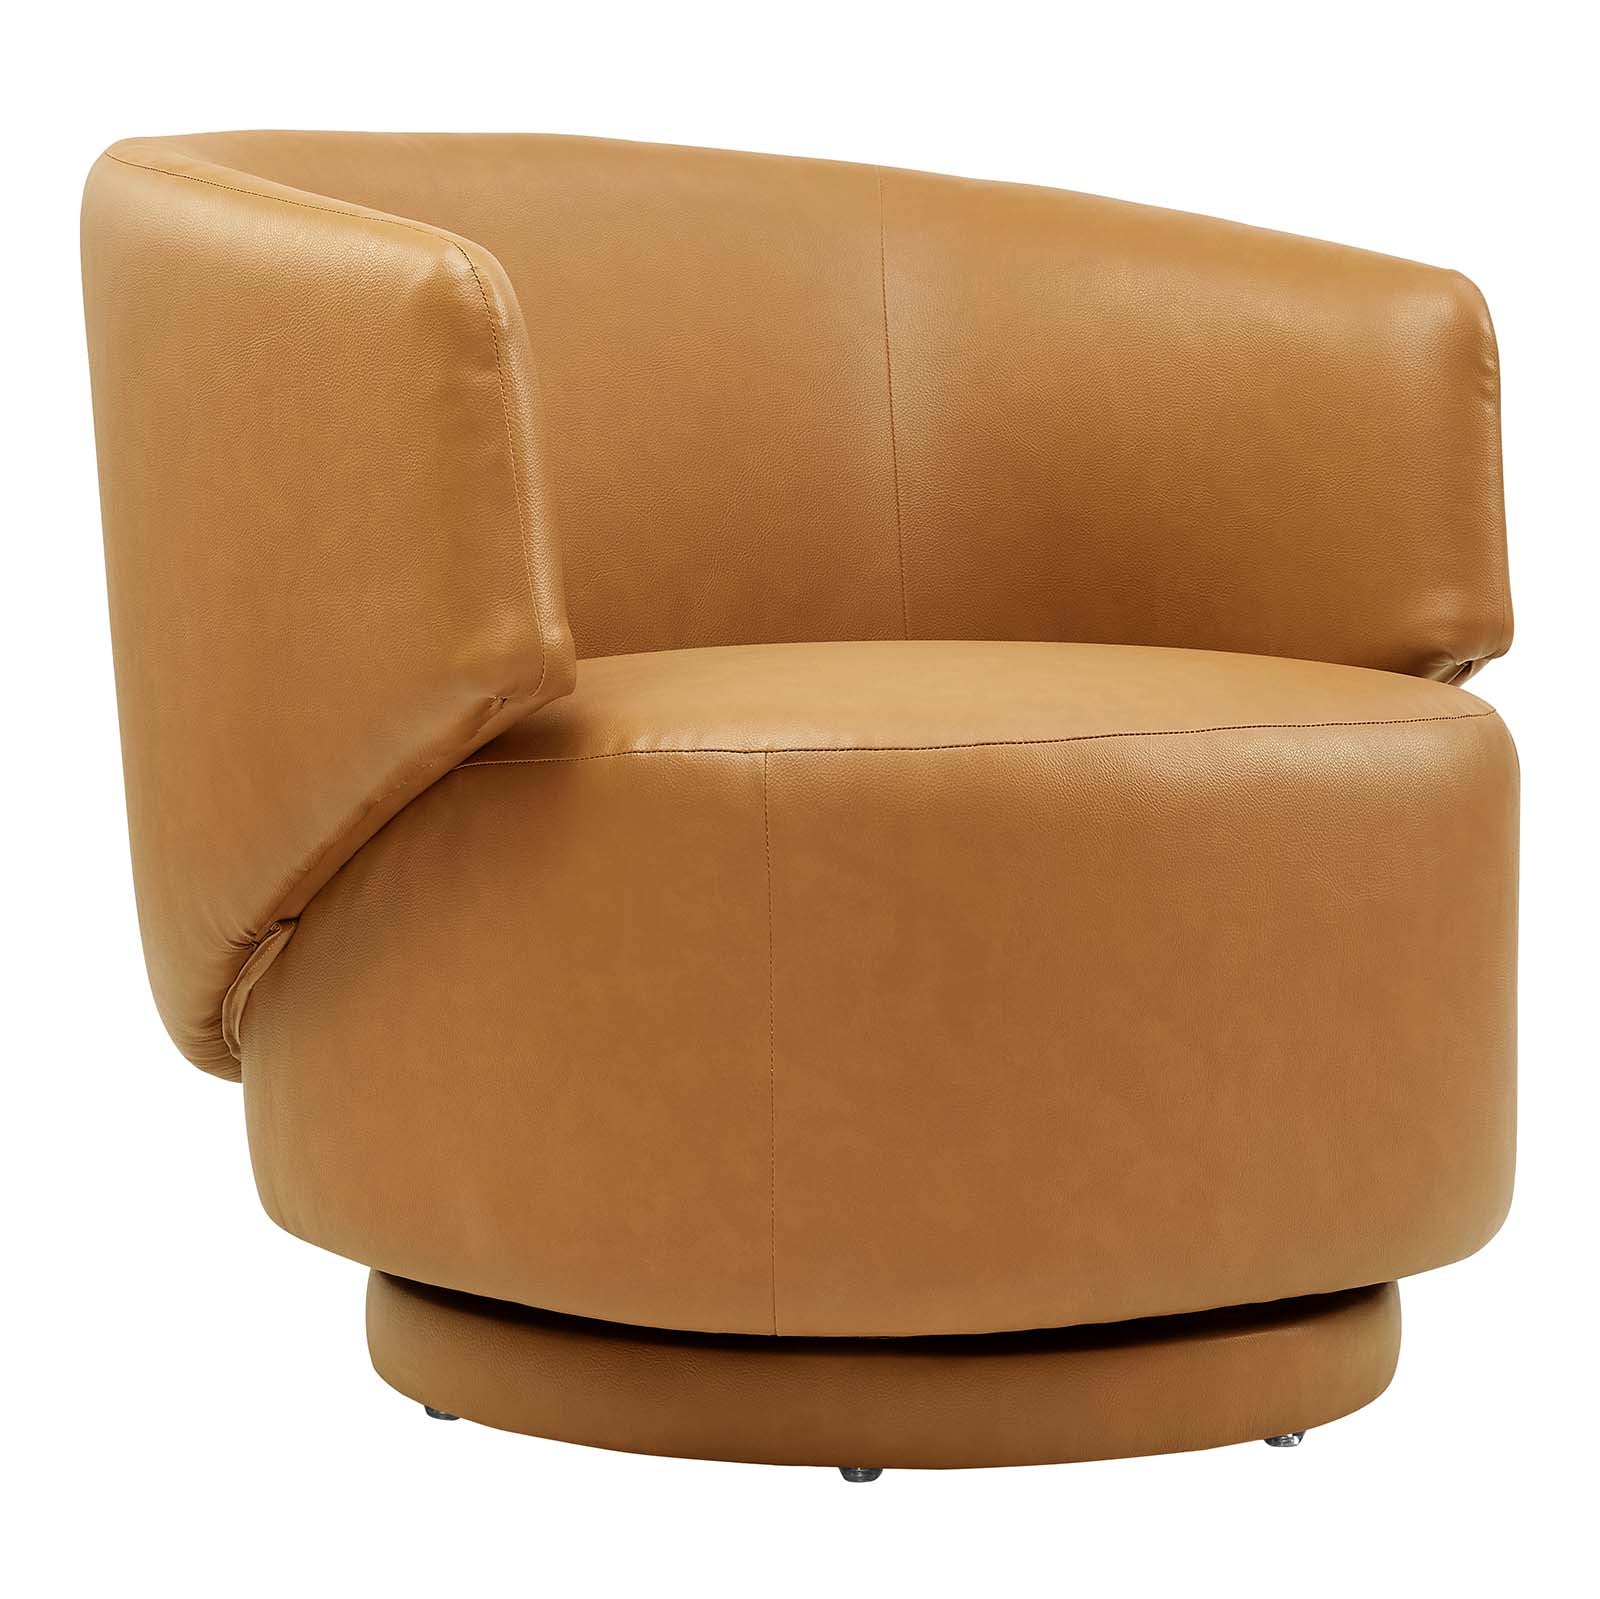 Modway Accent Chairs - Celestia-Vegan-Leather-Fabric-and-Wood-Swivel-Chair-Tan